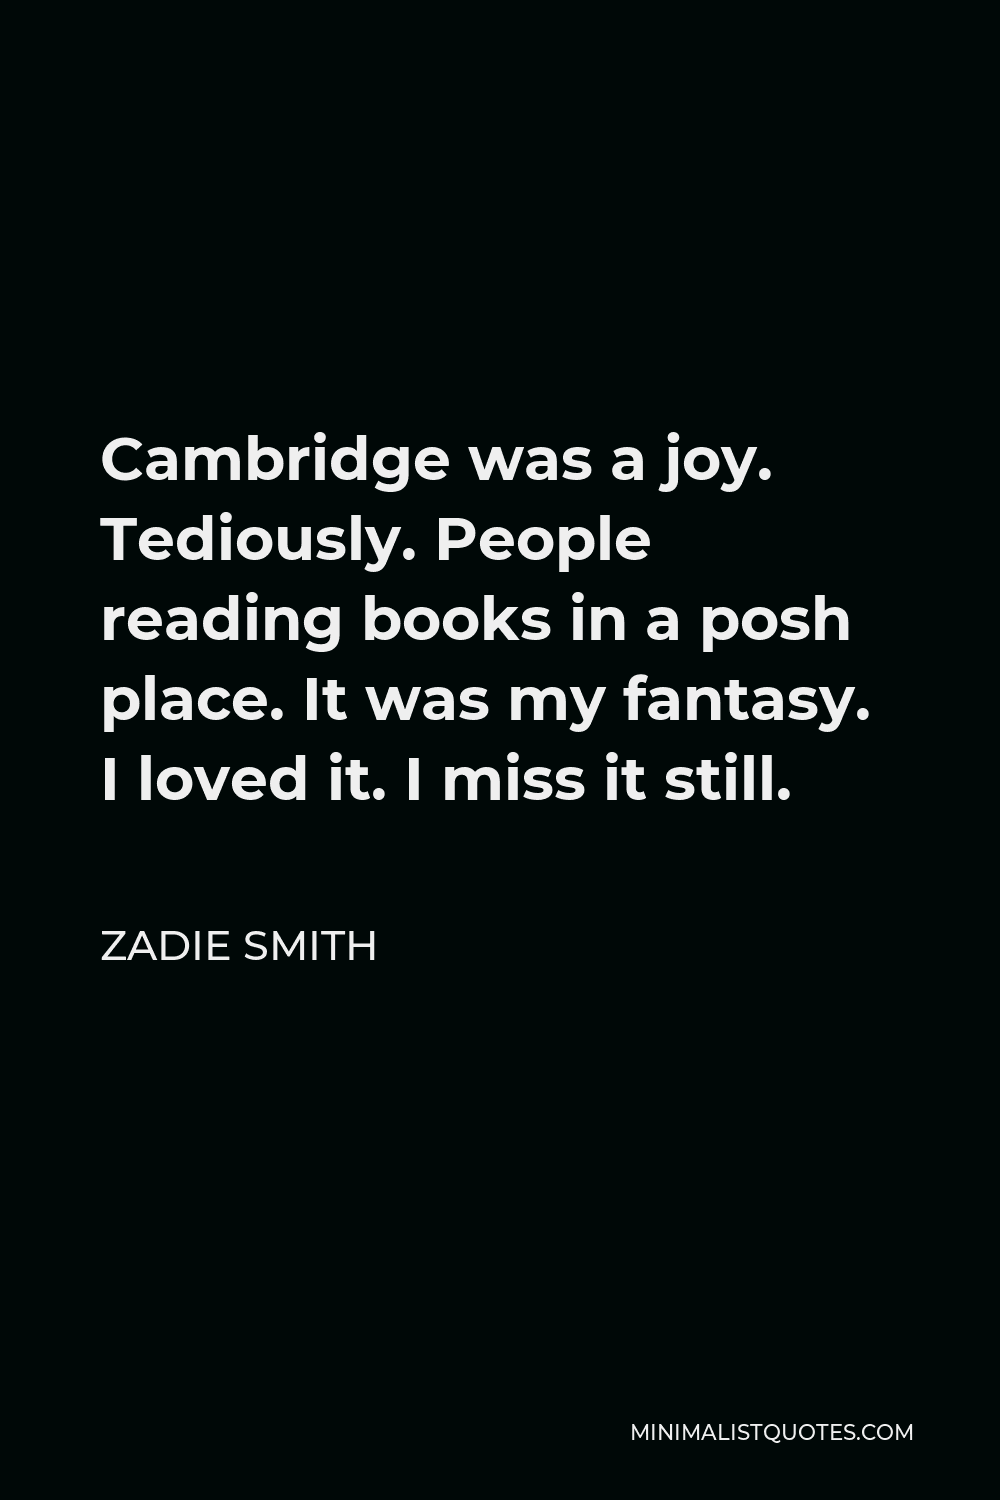 Zadie Smith Quote - Cambridge was a joy. Tediously. People reading books in a posh place. It was my fantasy. I loved it. I miss it still.